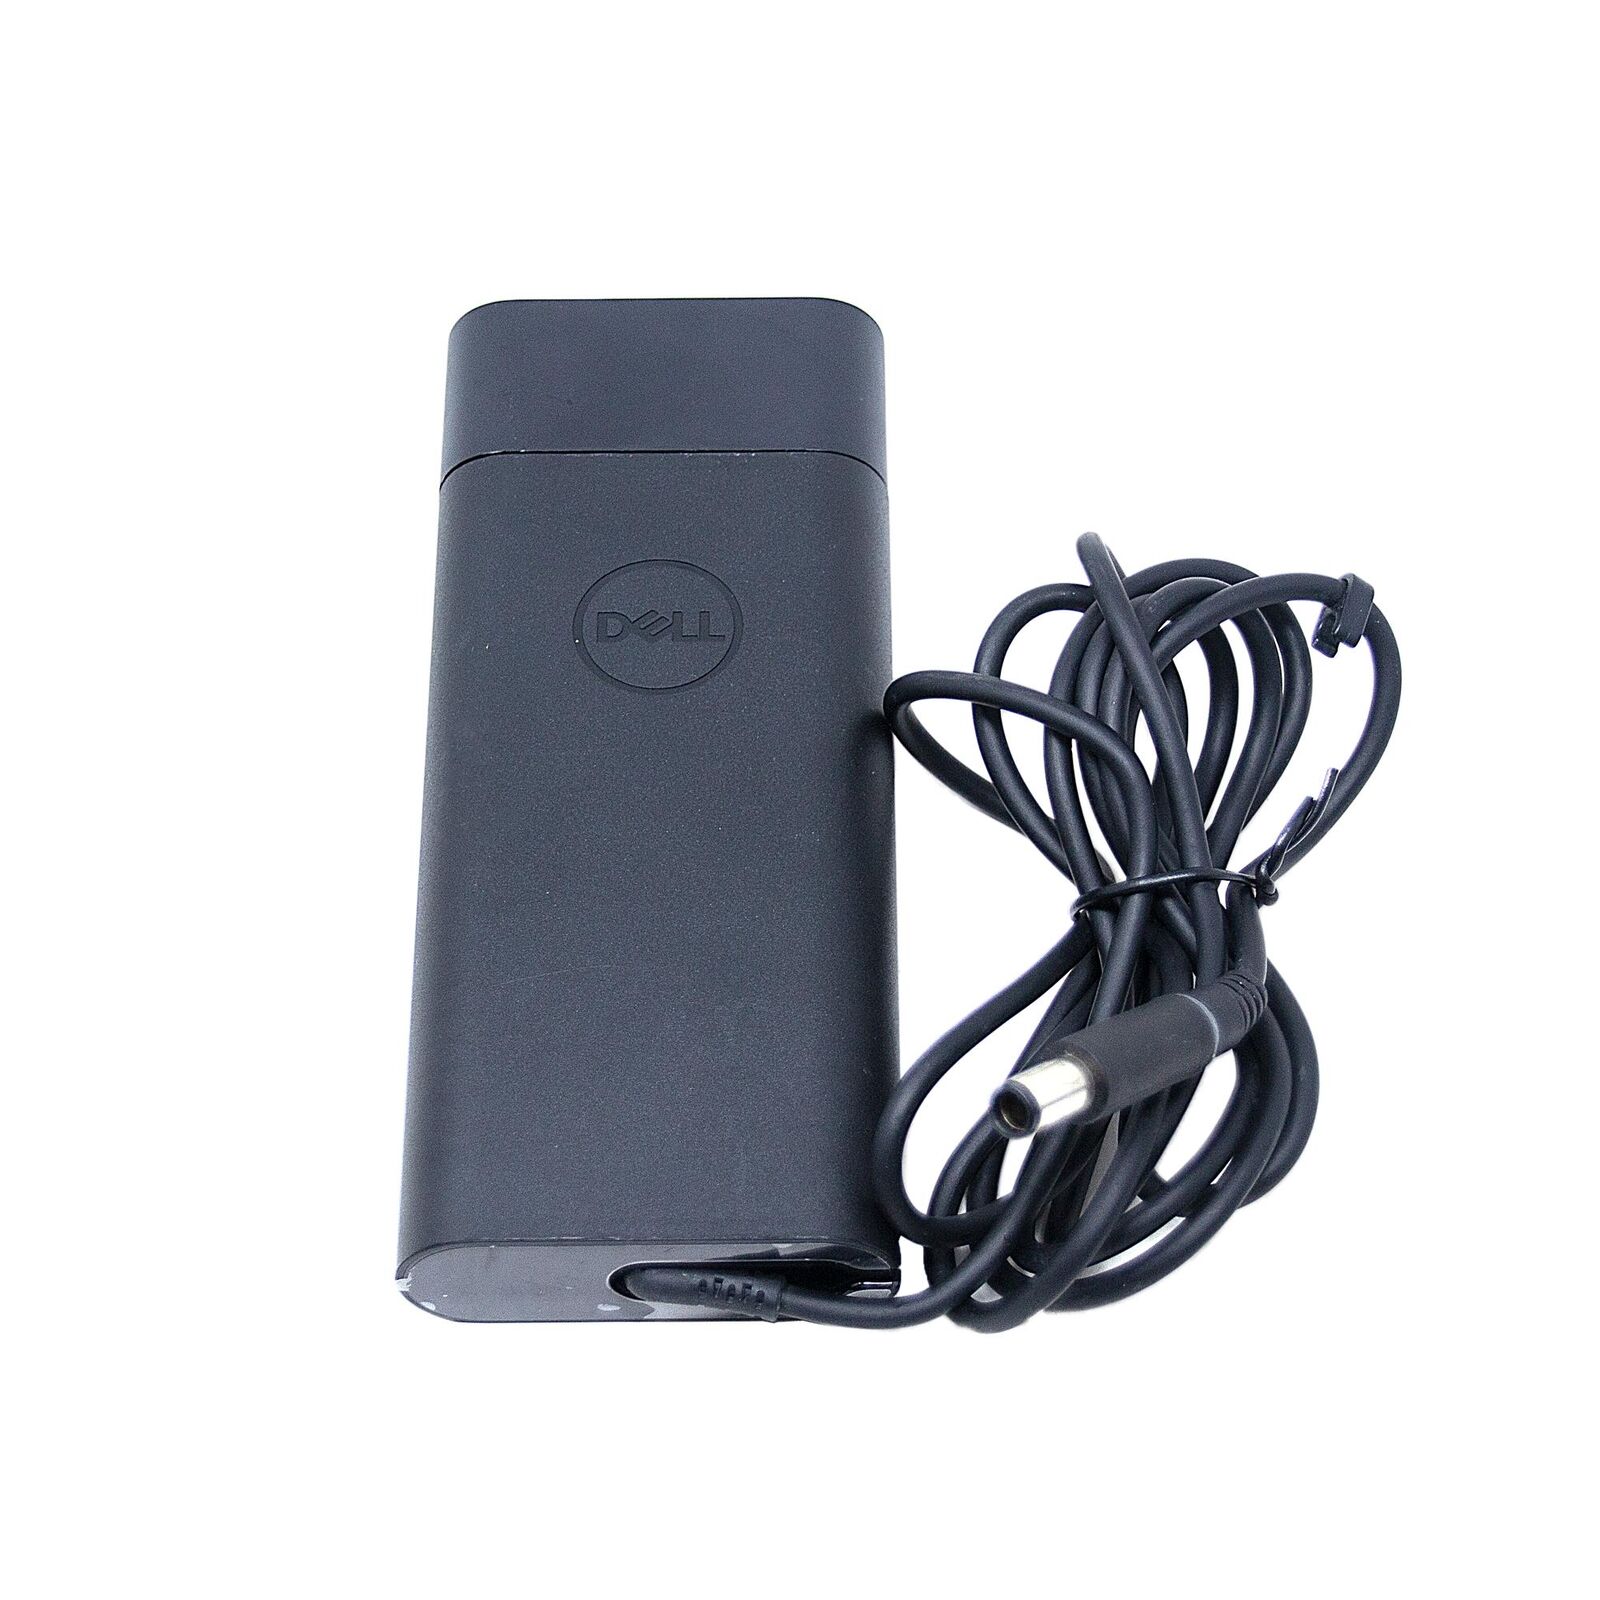 DELL ADP-90AH 19.5V 4.62A 90W Genuine Original AC Power Adapter Charger